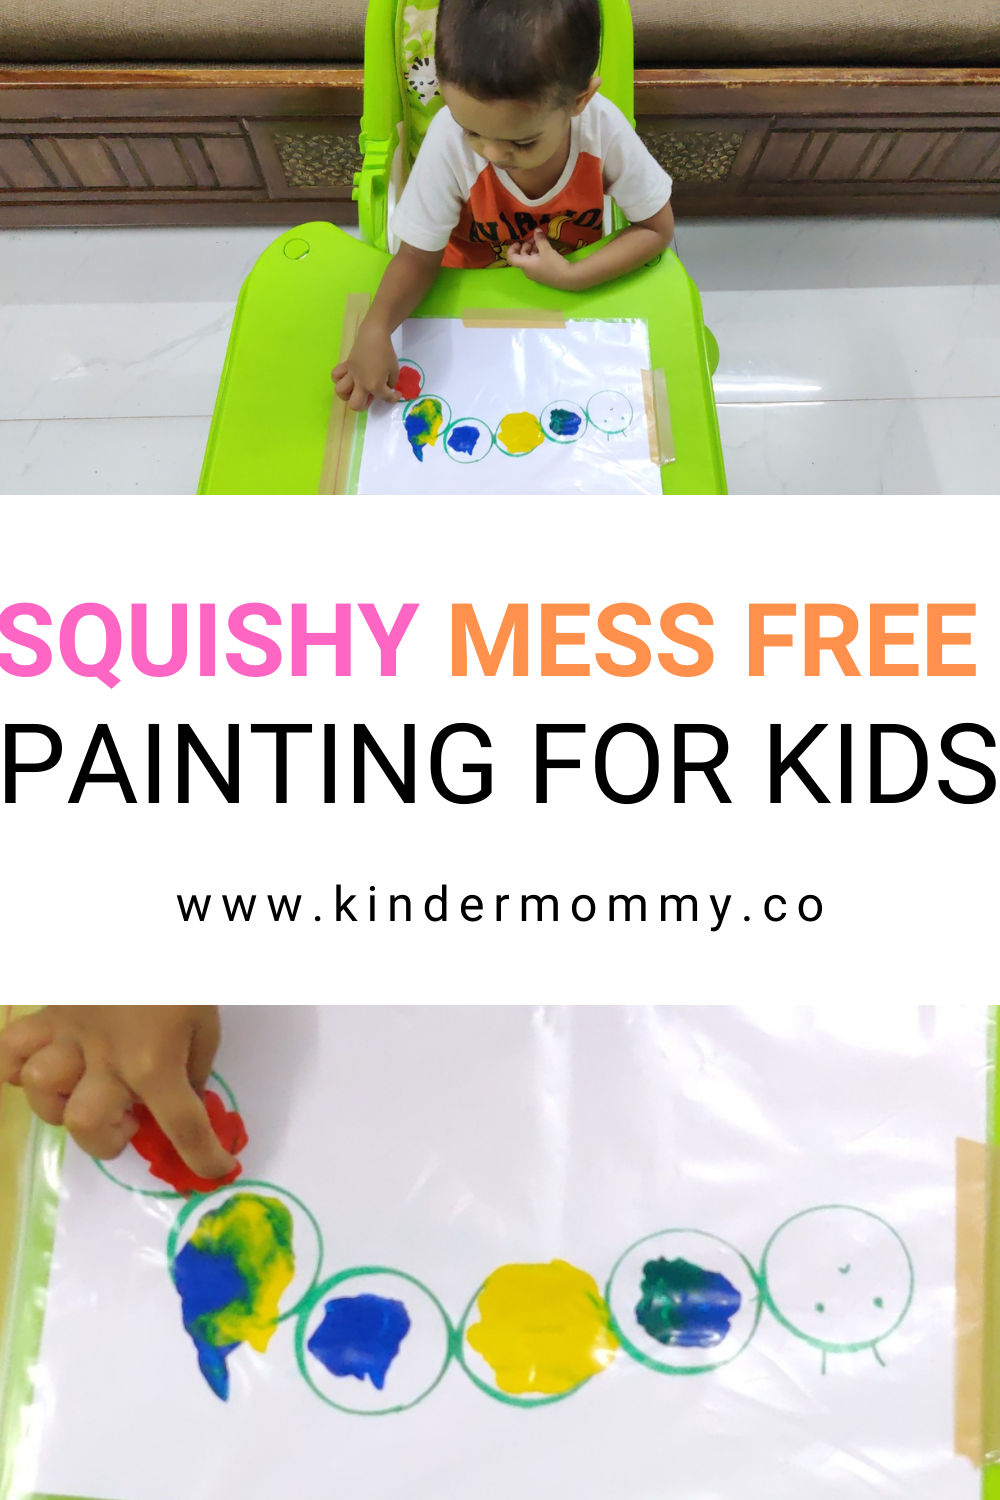 Squishy Mess Free Painting for Kids